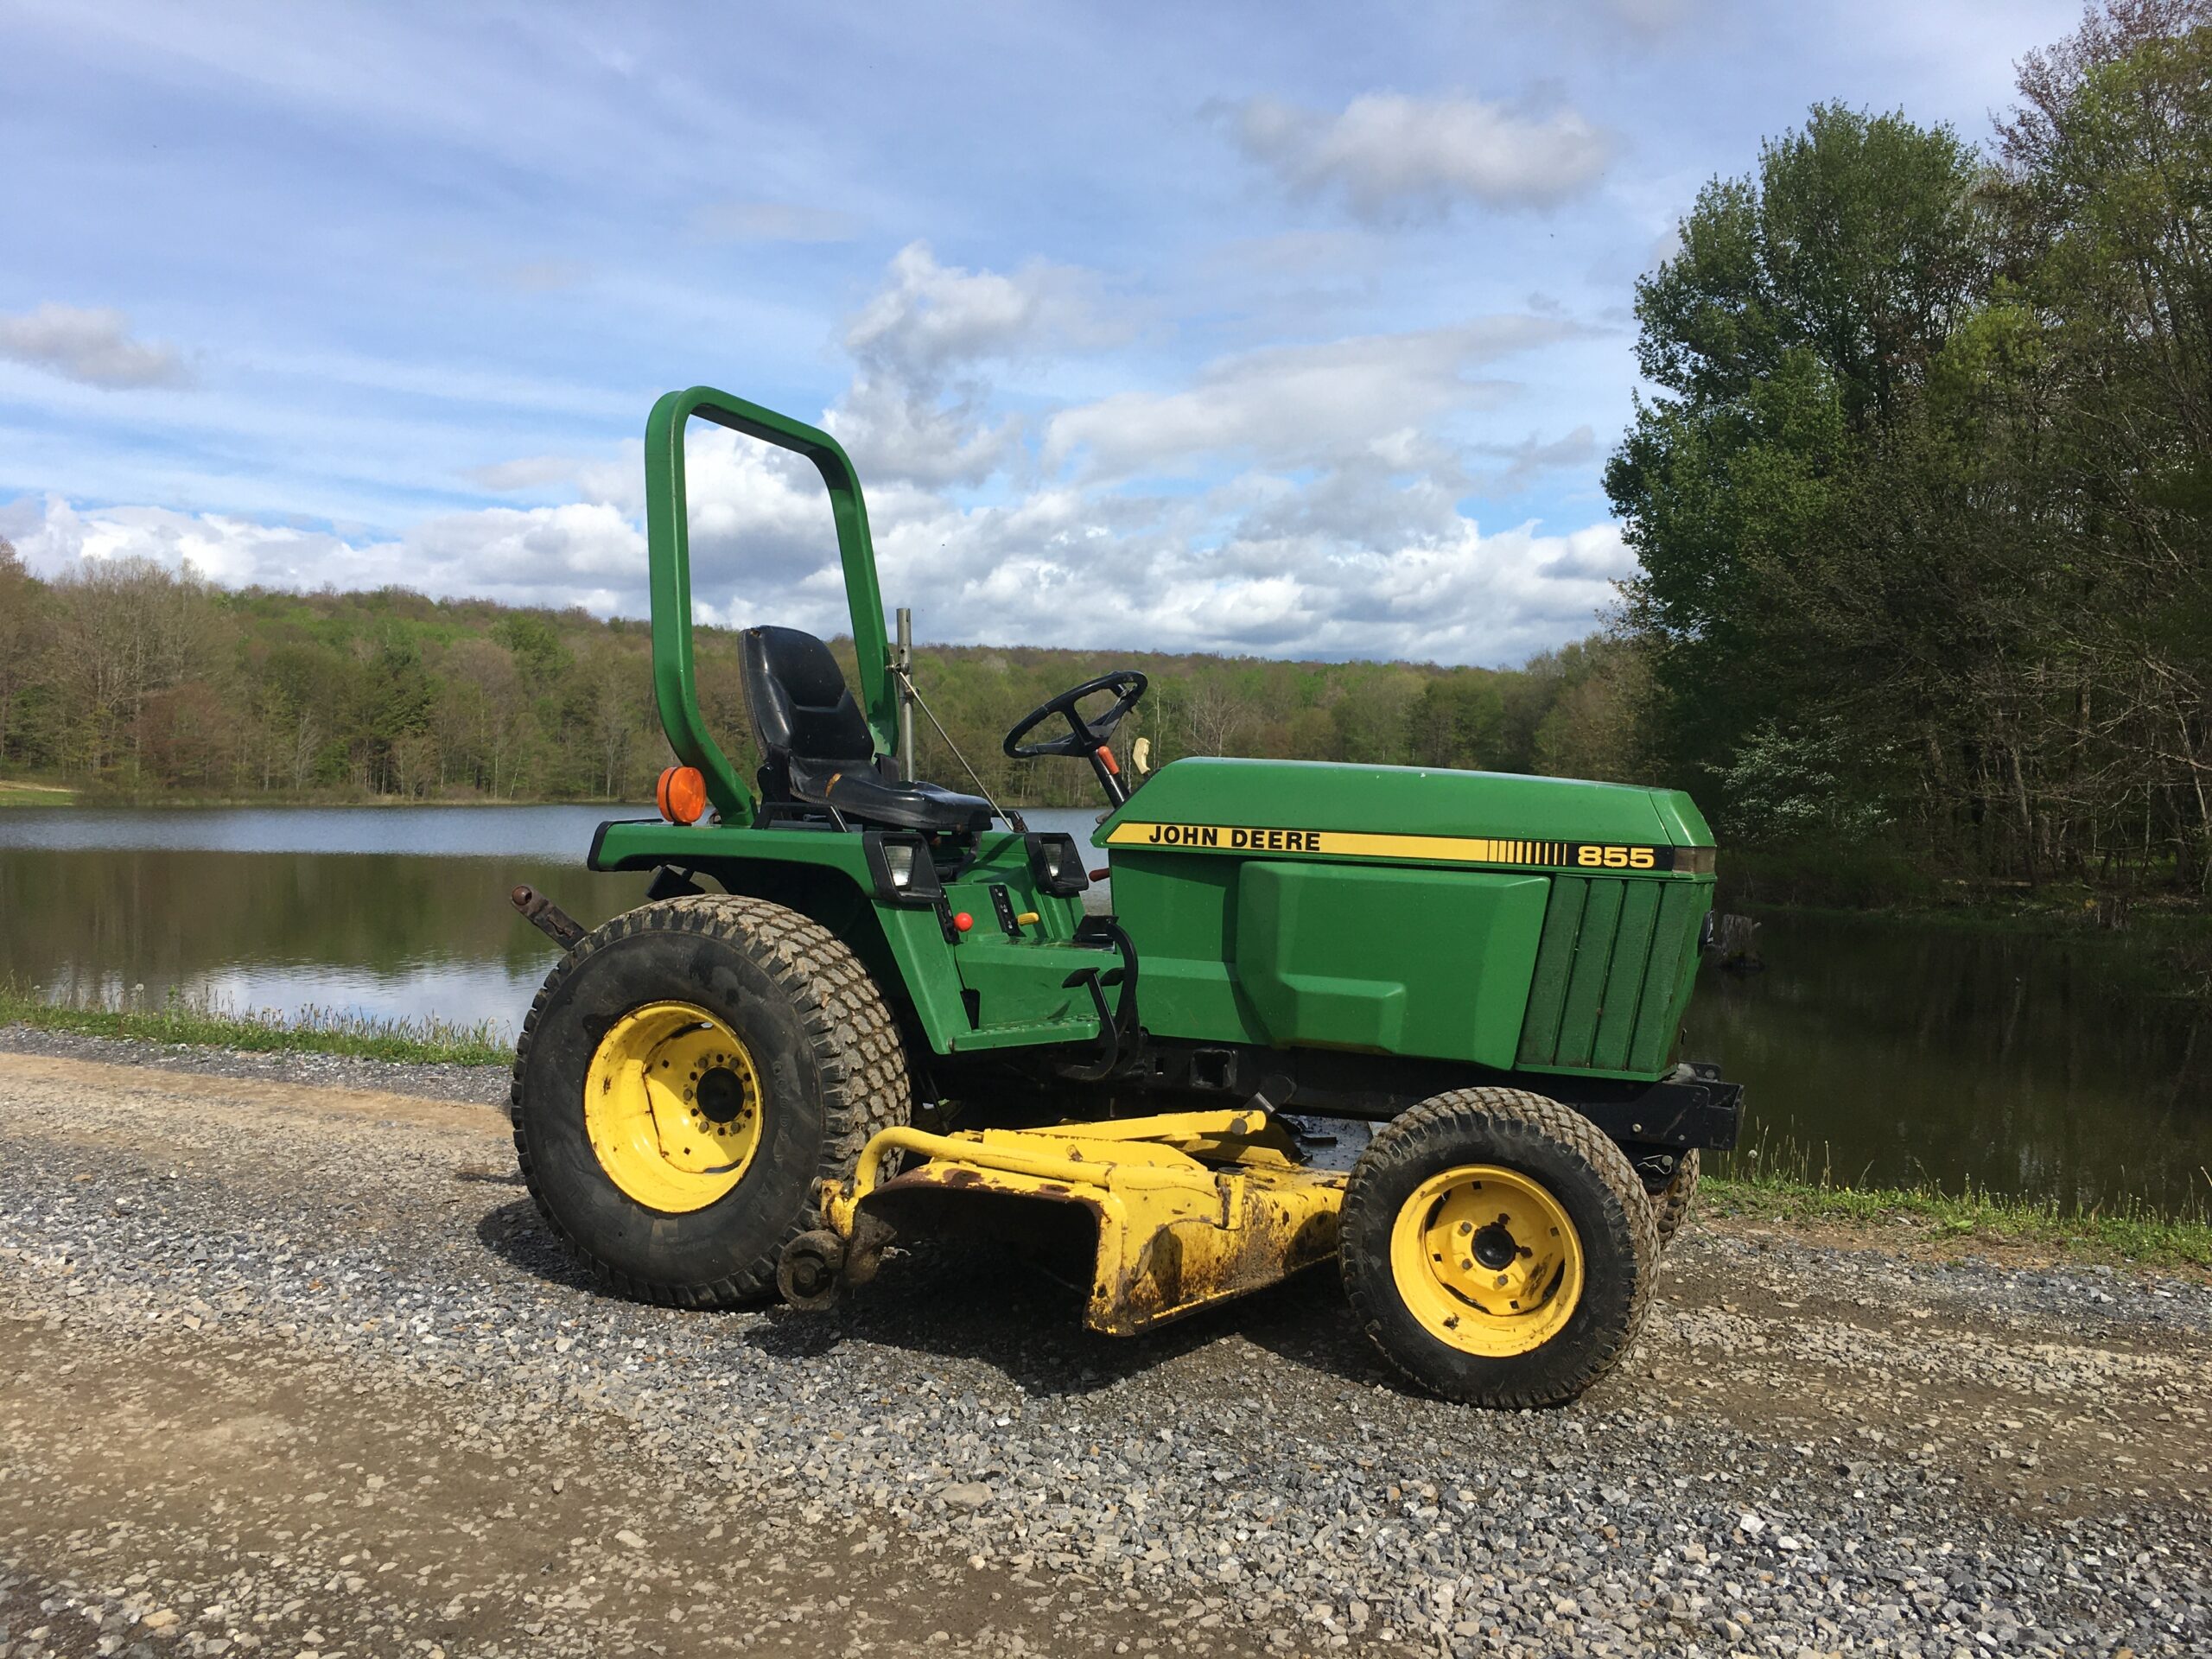 You are currently viewing John Deere 855